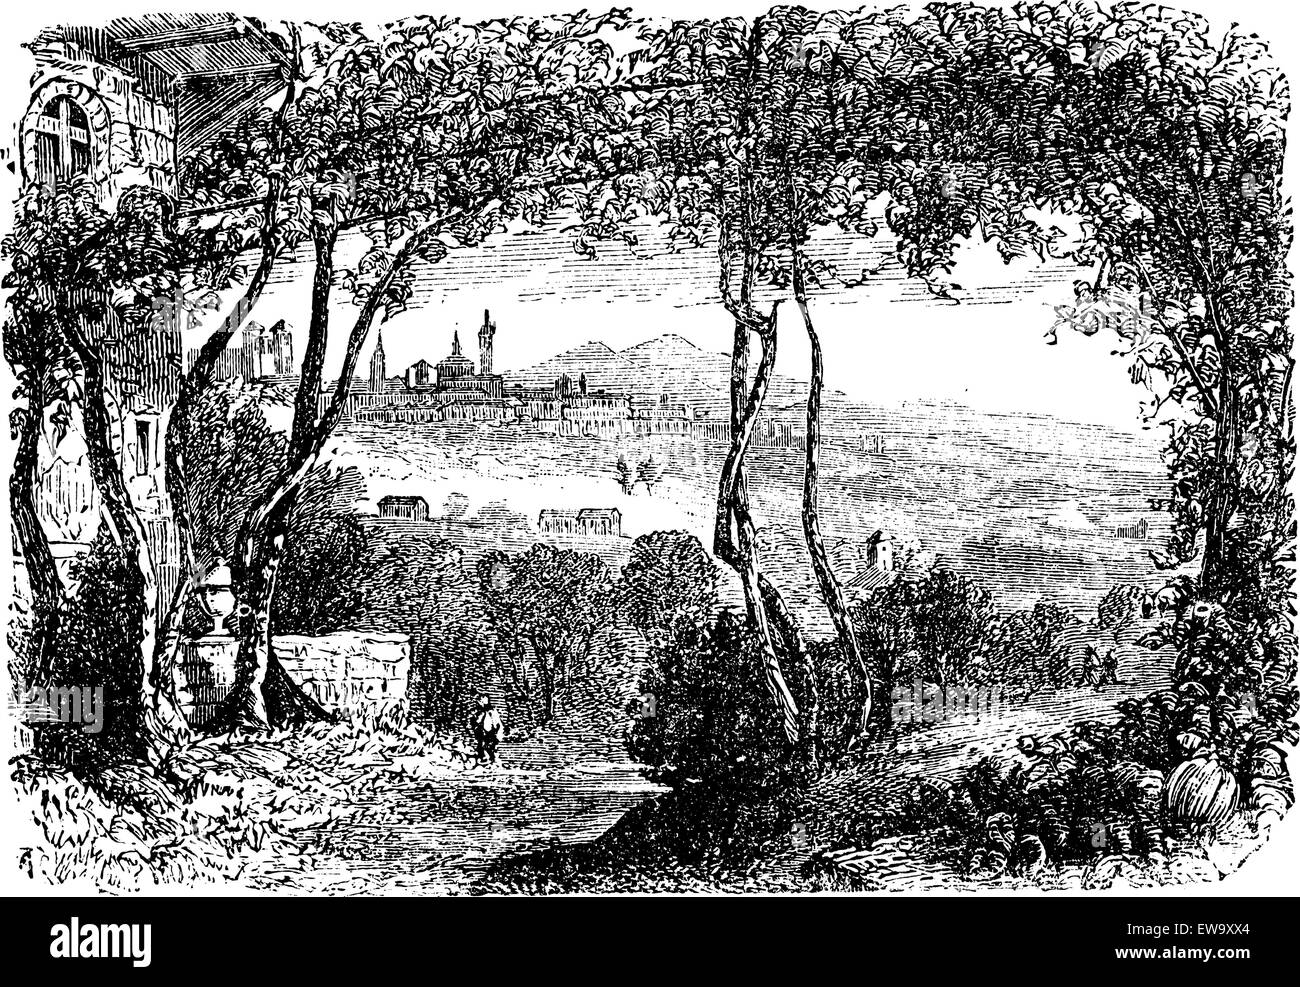 Bergamo, in Lombardi, Italy, during the 1890s, vintage engraving. Old engraved illustration of Bergamo. Stock Vector